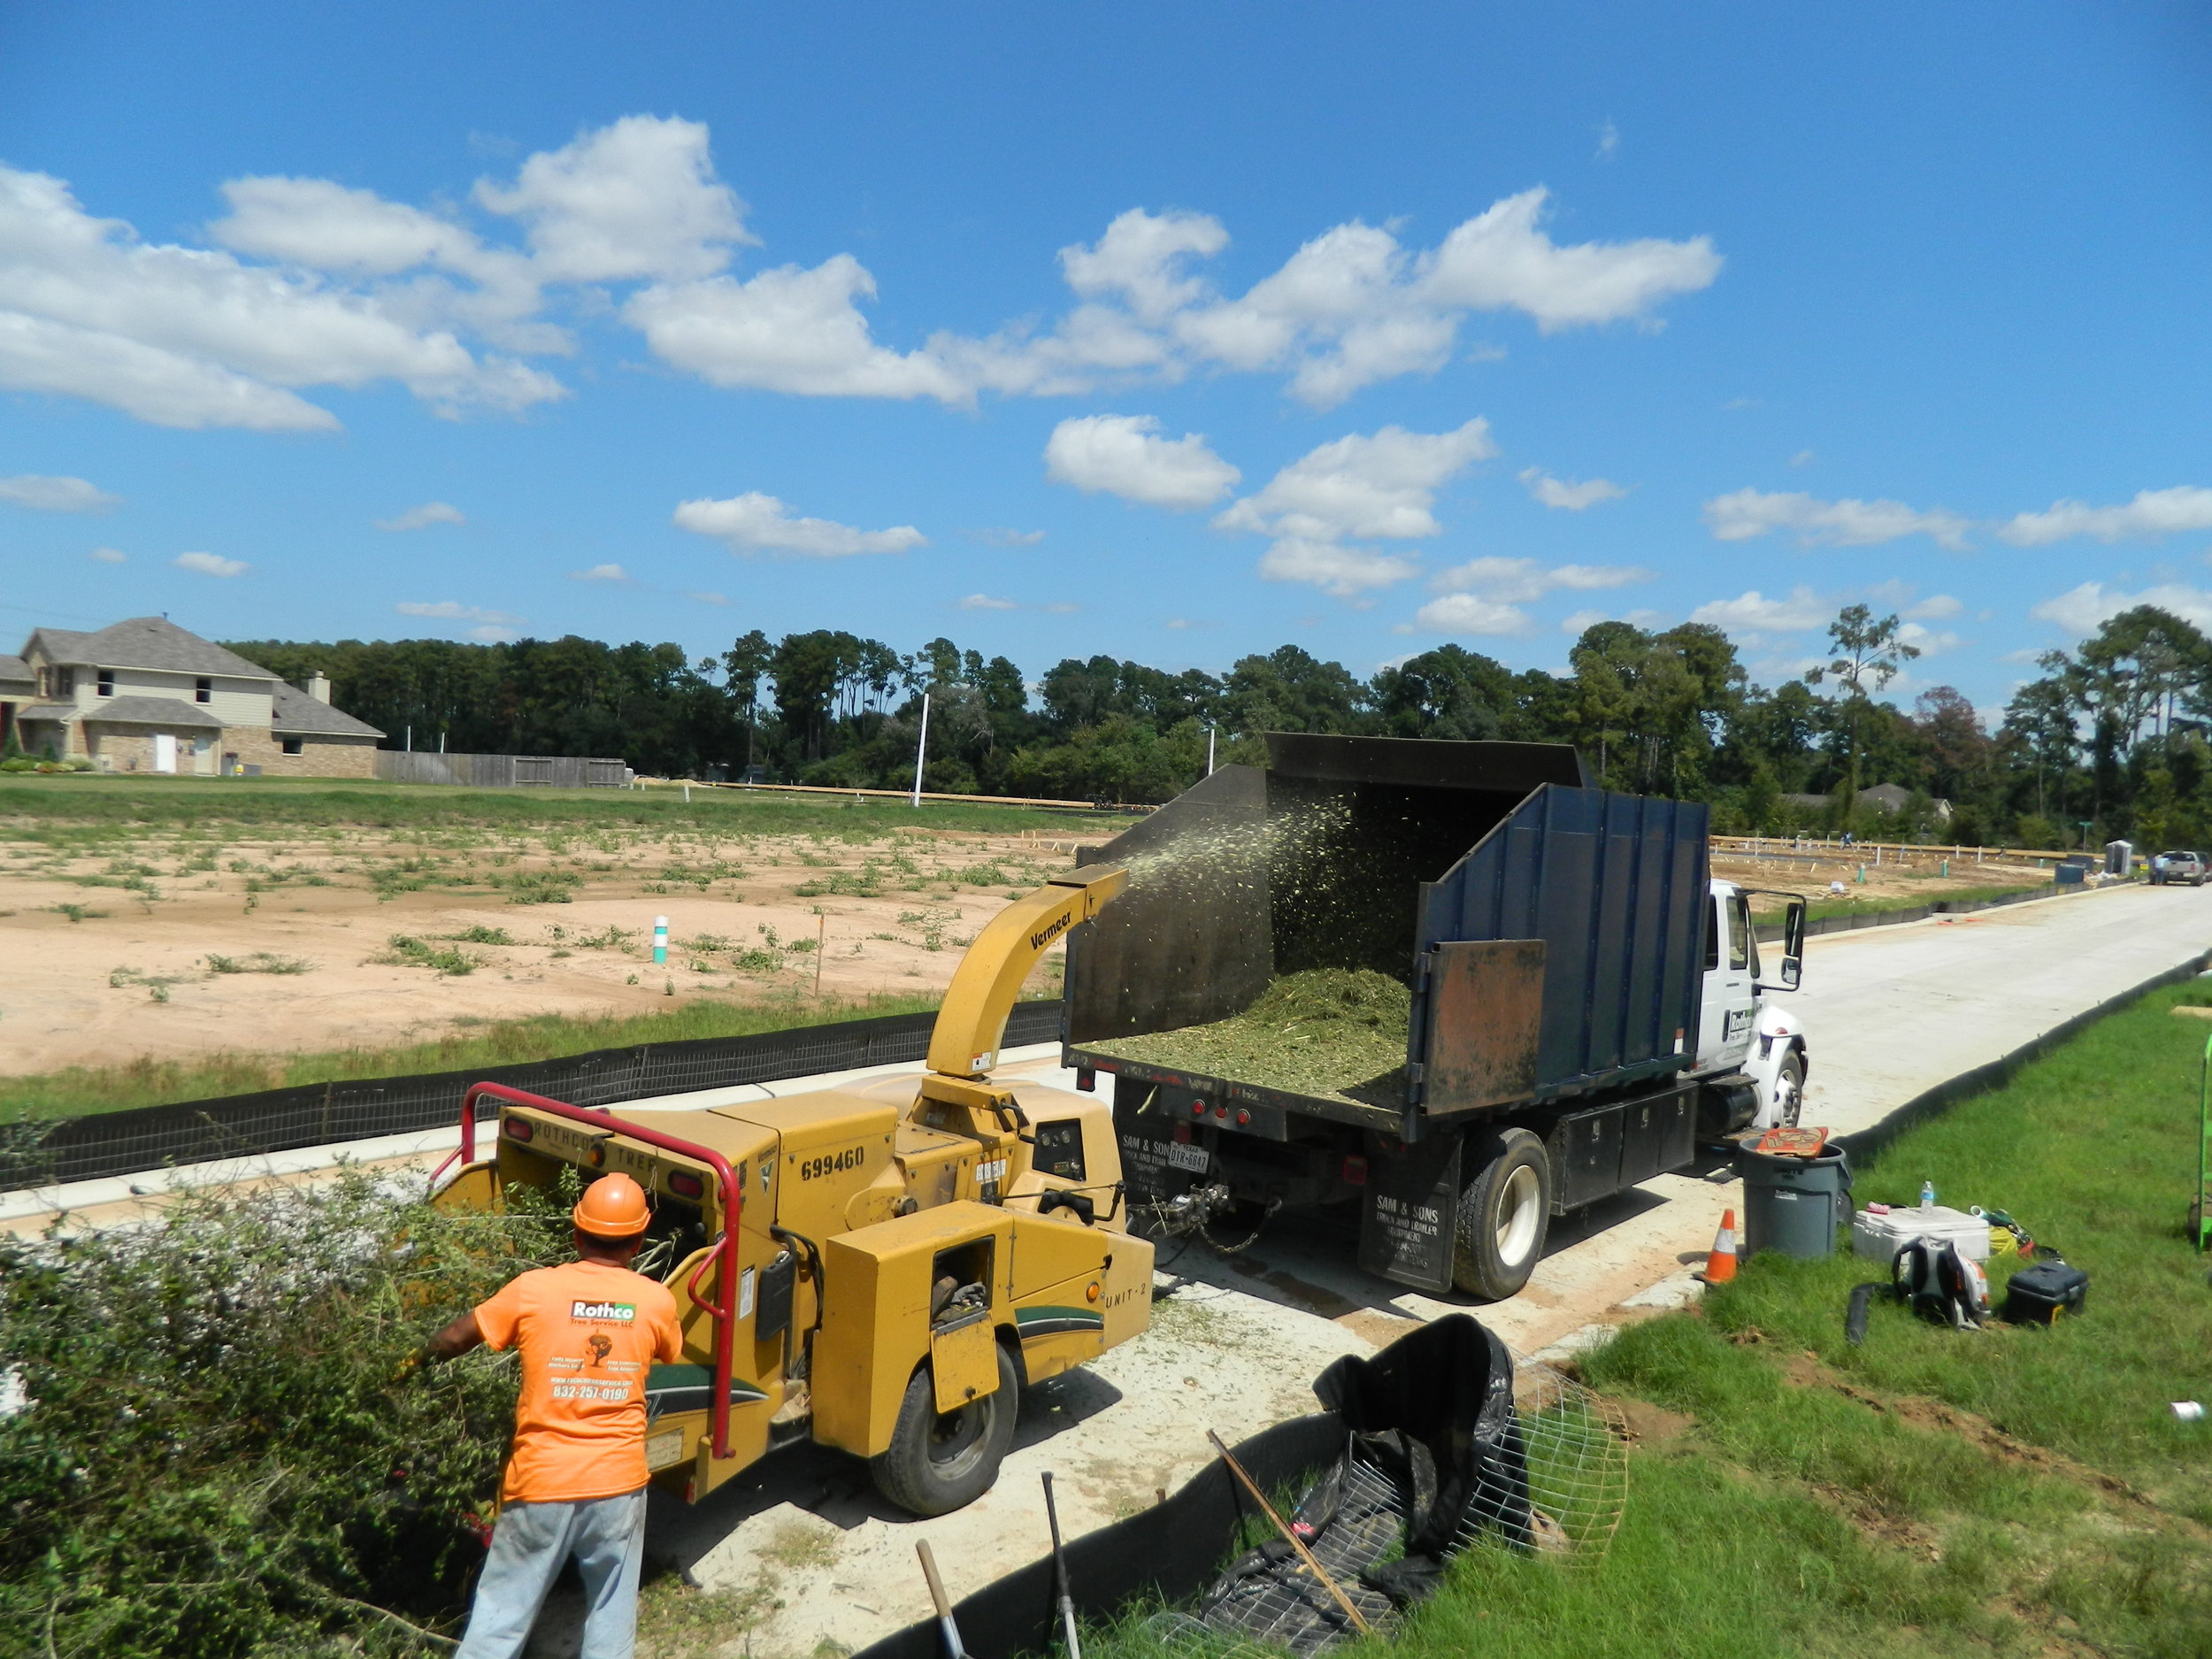 lot and land clearing with the chipper near lake conroe